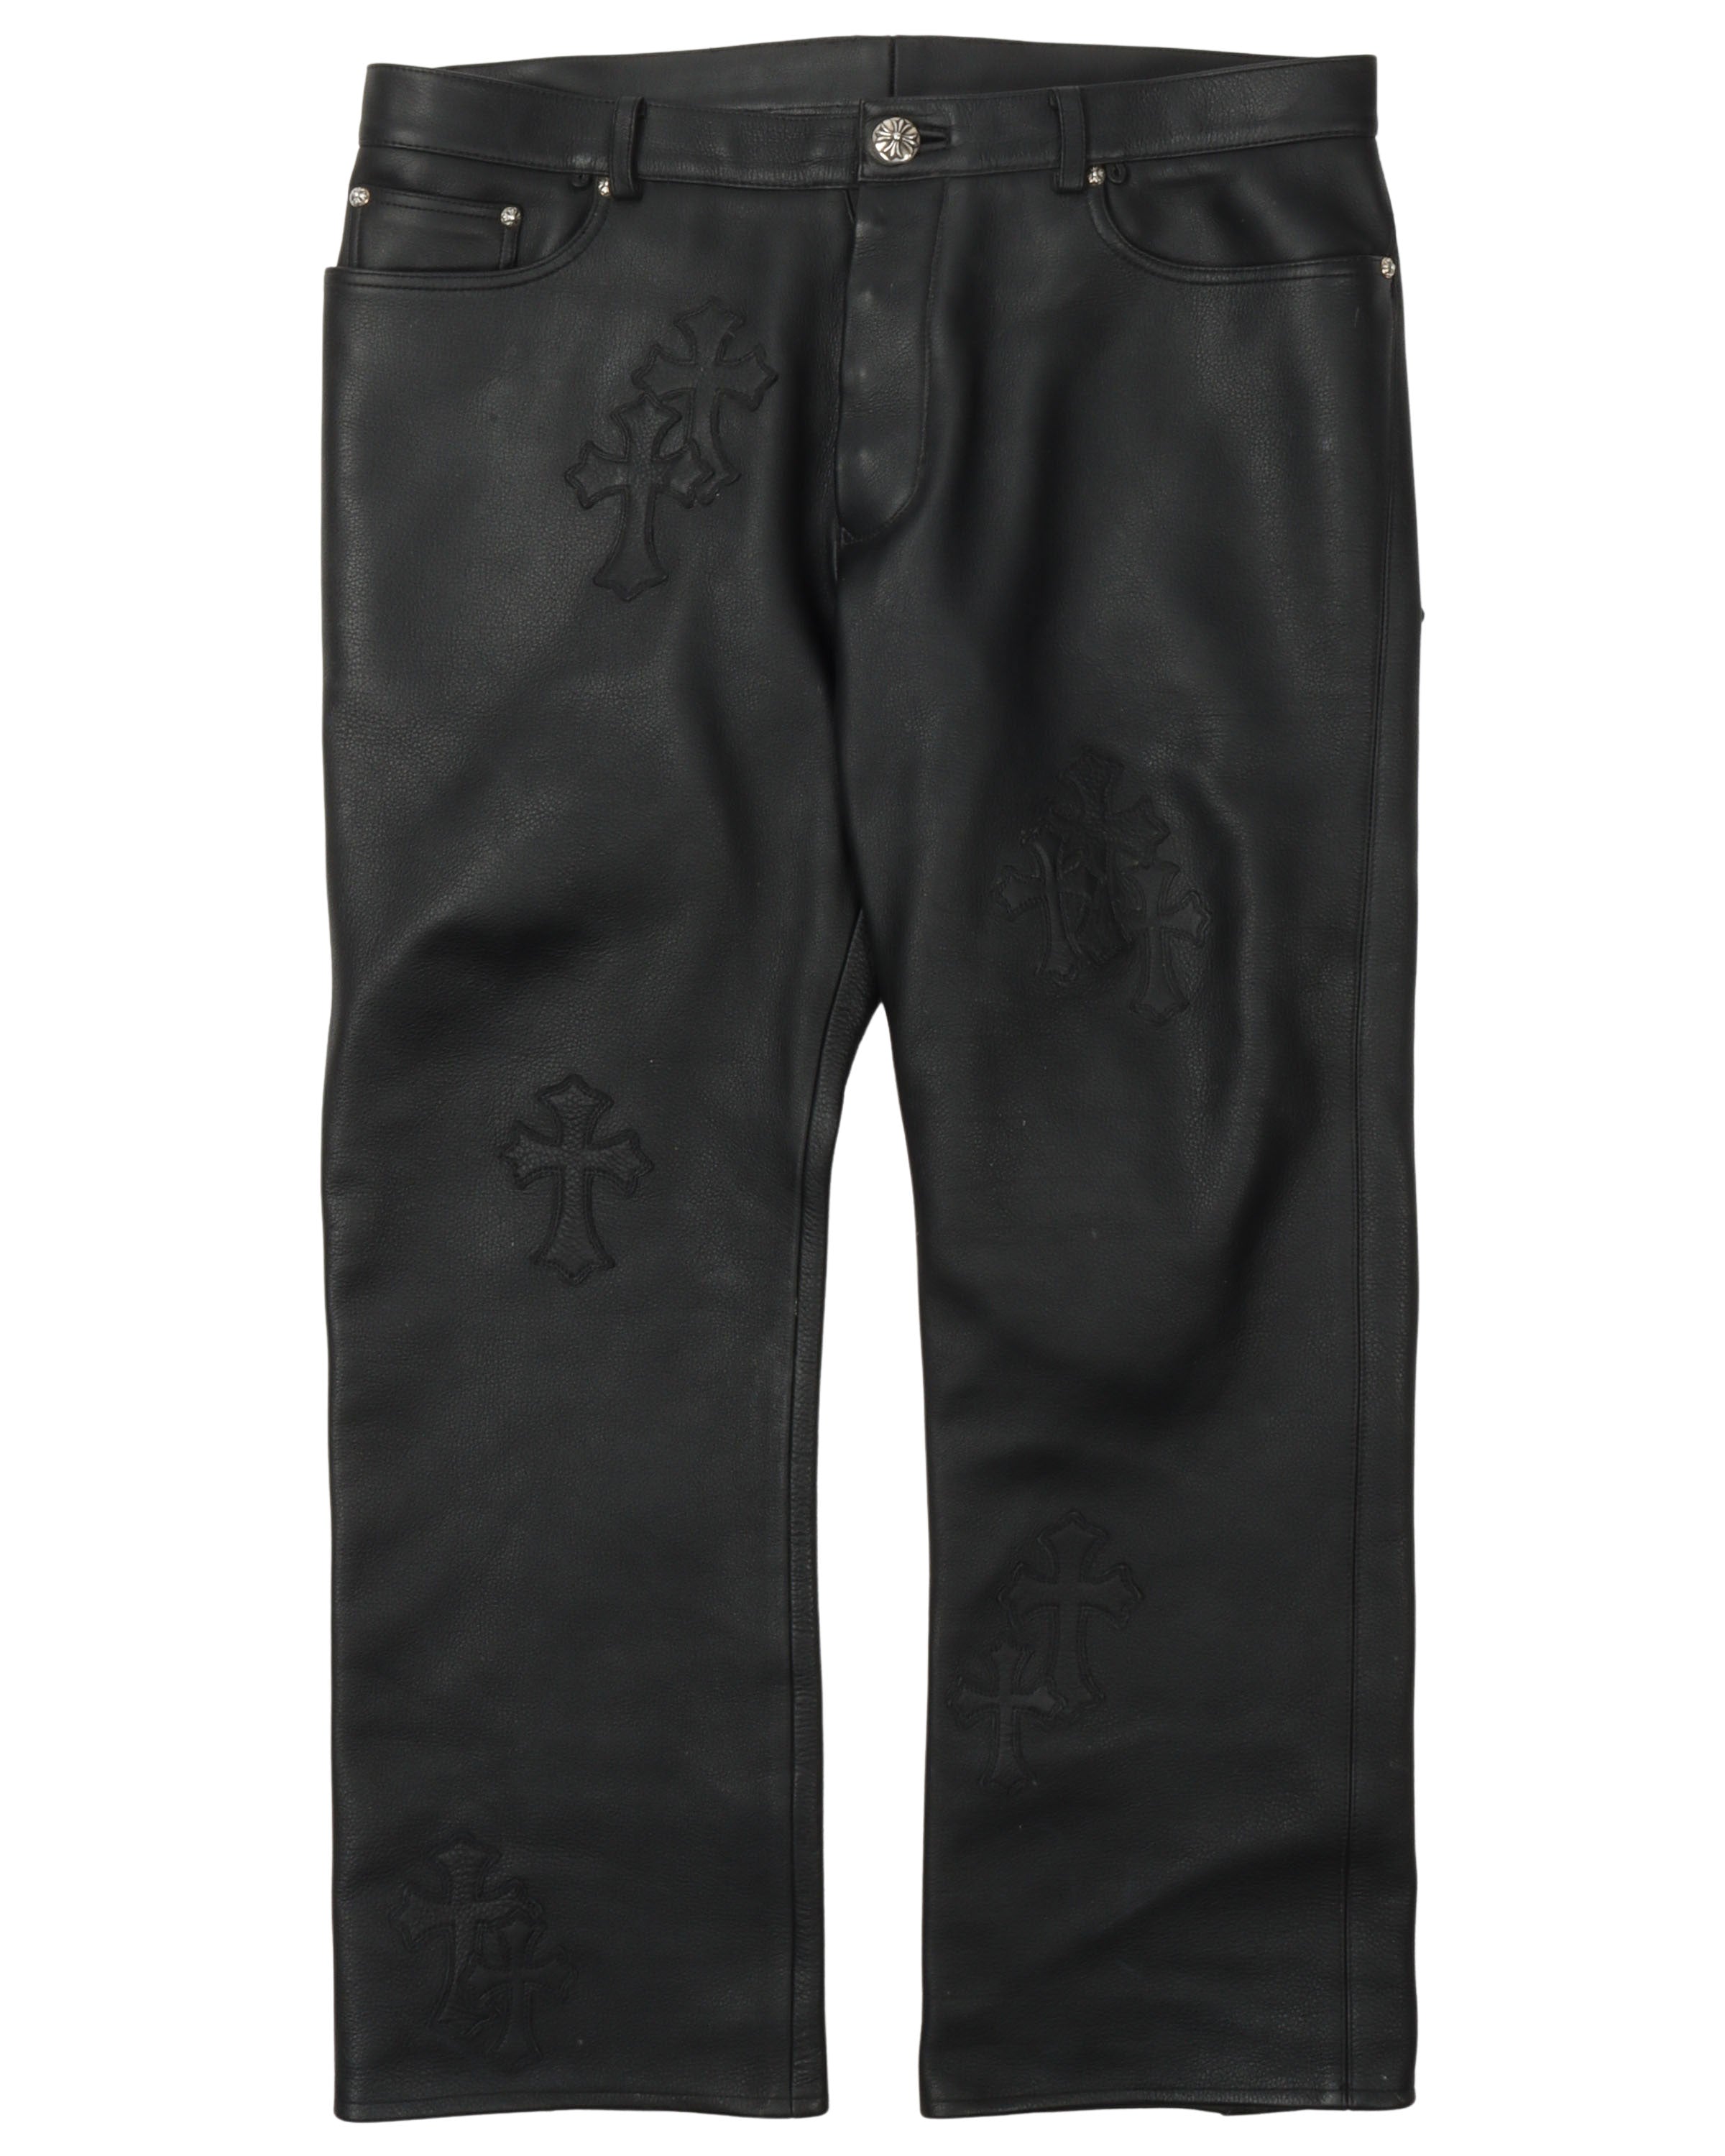 Chrome Hearts Leather Cross Leather Pants